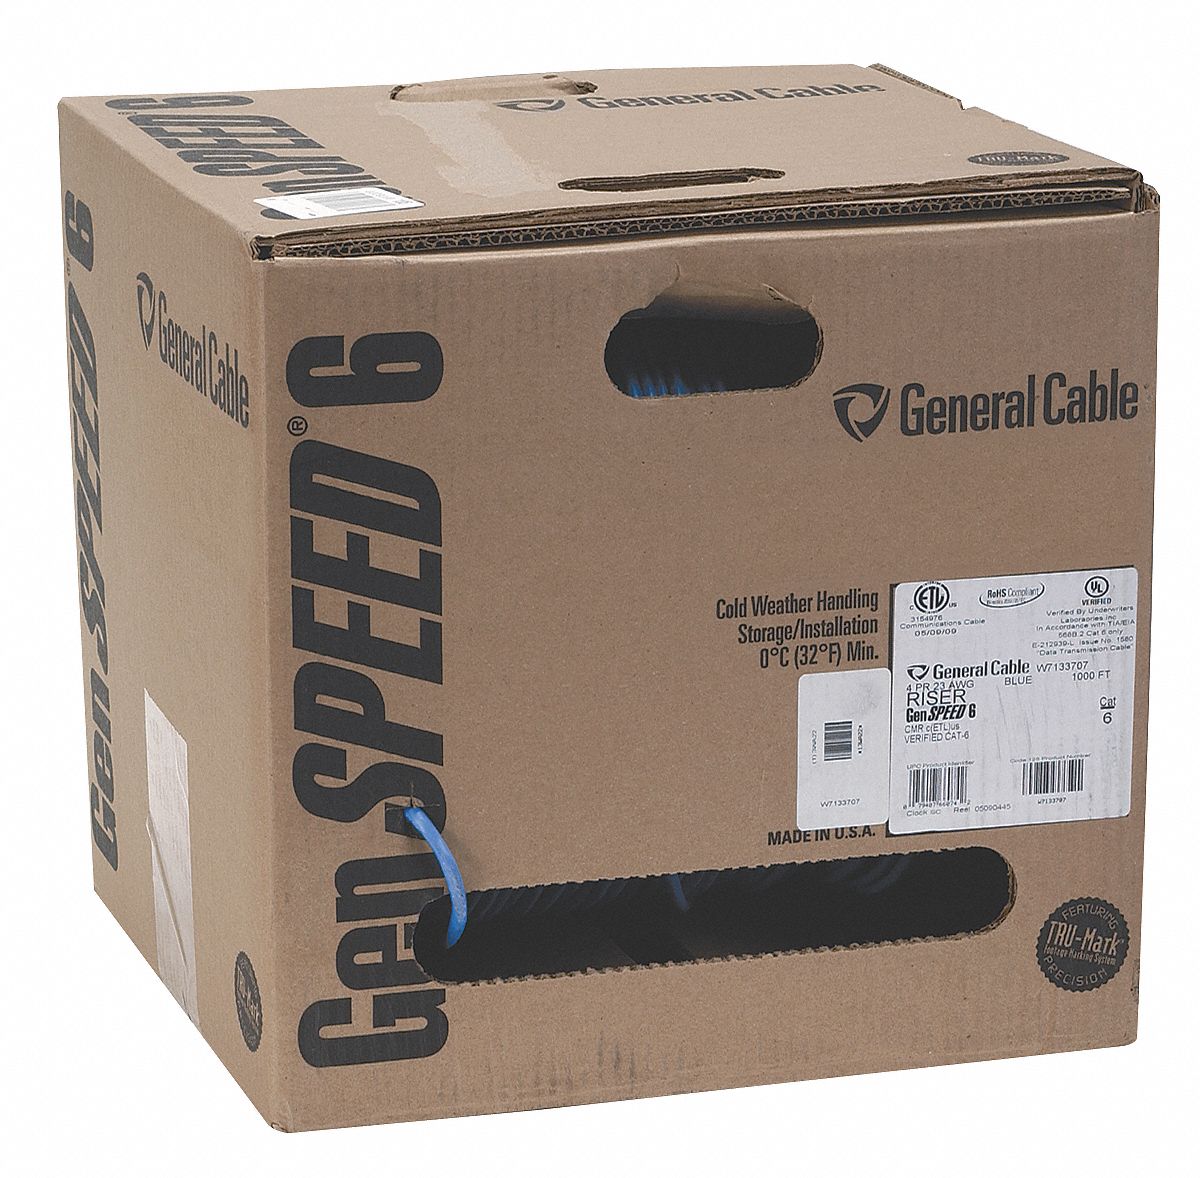 Category Cable: 1,000 ft Spool Lg, Blue, Reel in a Box, 23 AWG Conductor Size - Data Cable